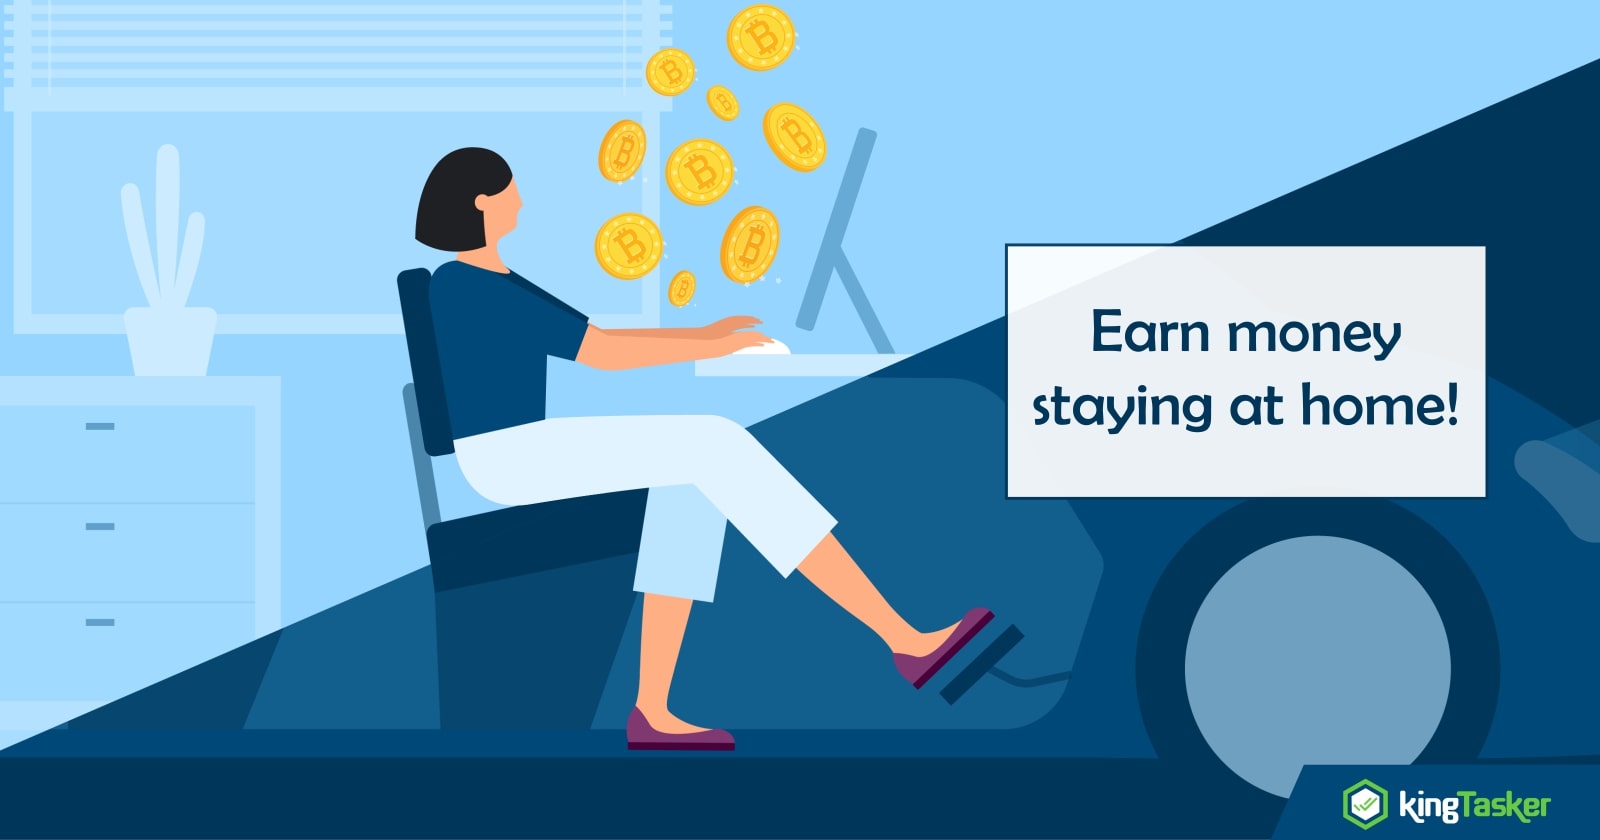 Earning Made Easy While Staying at Home!